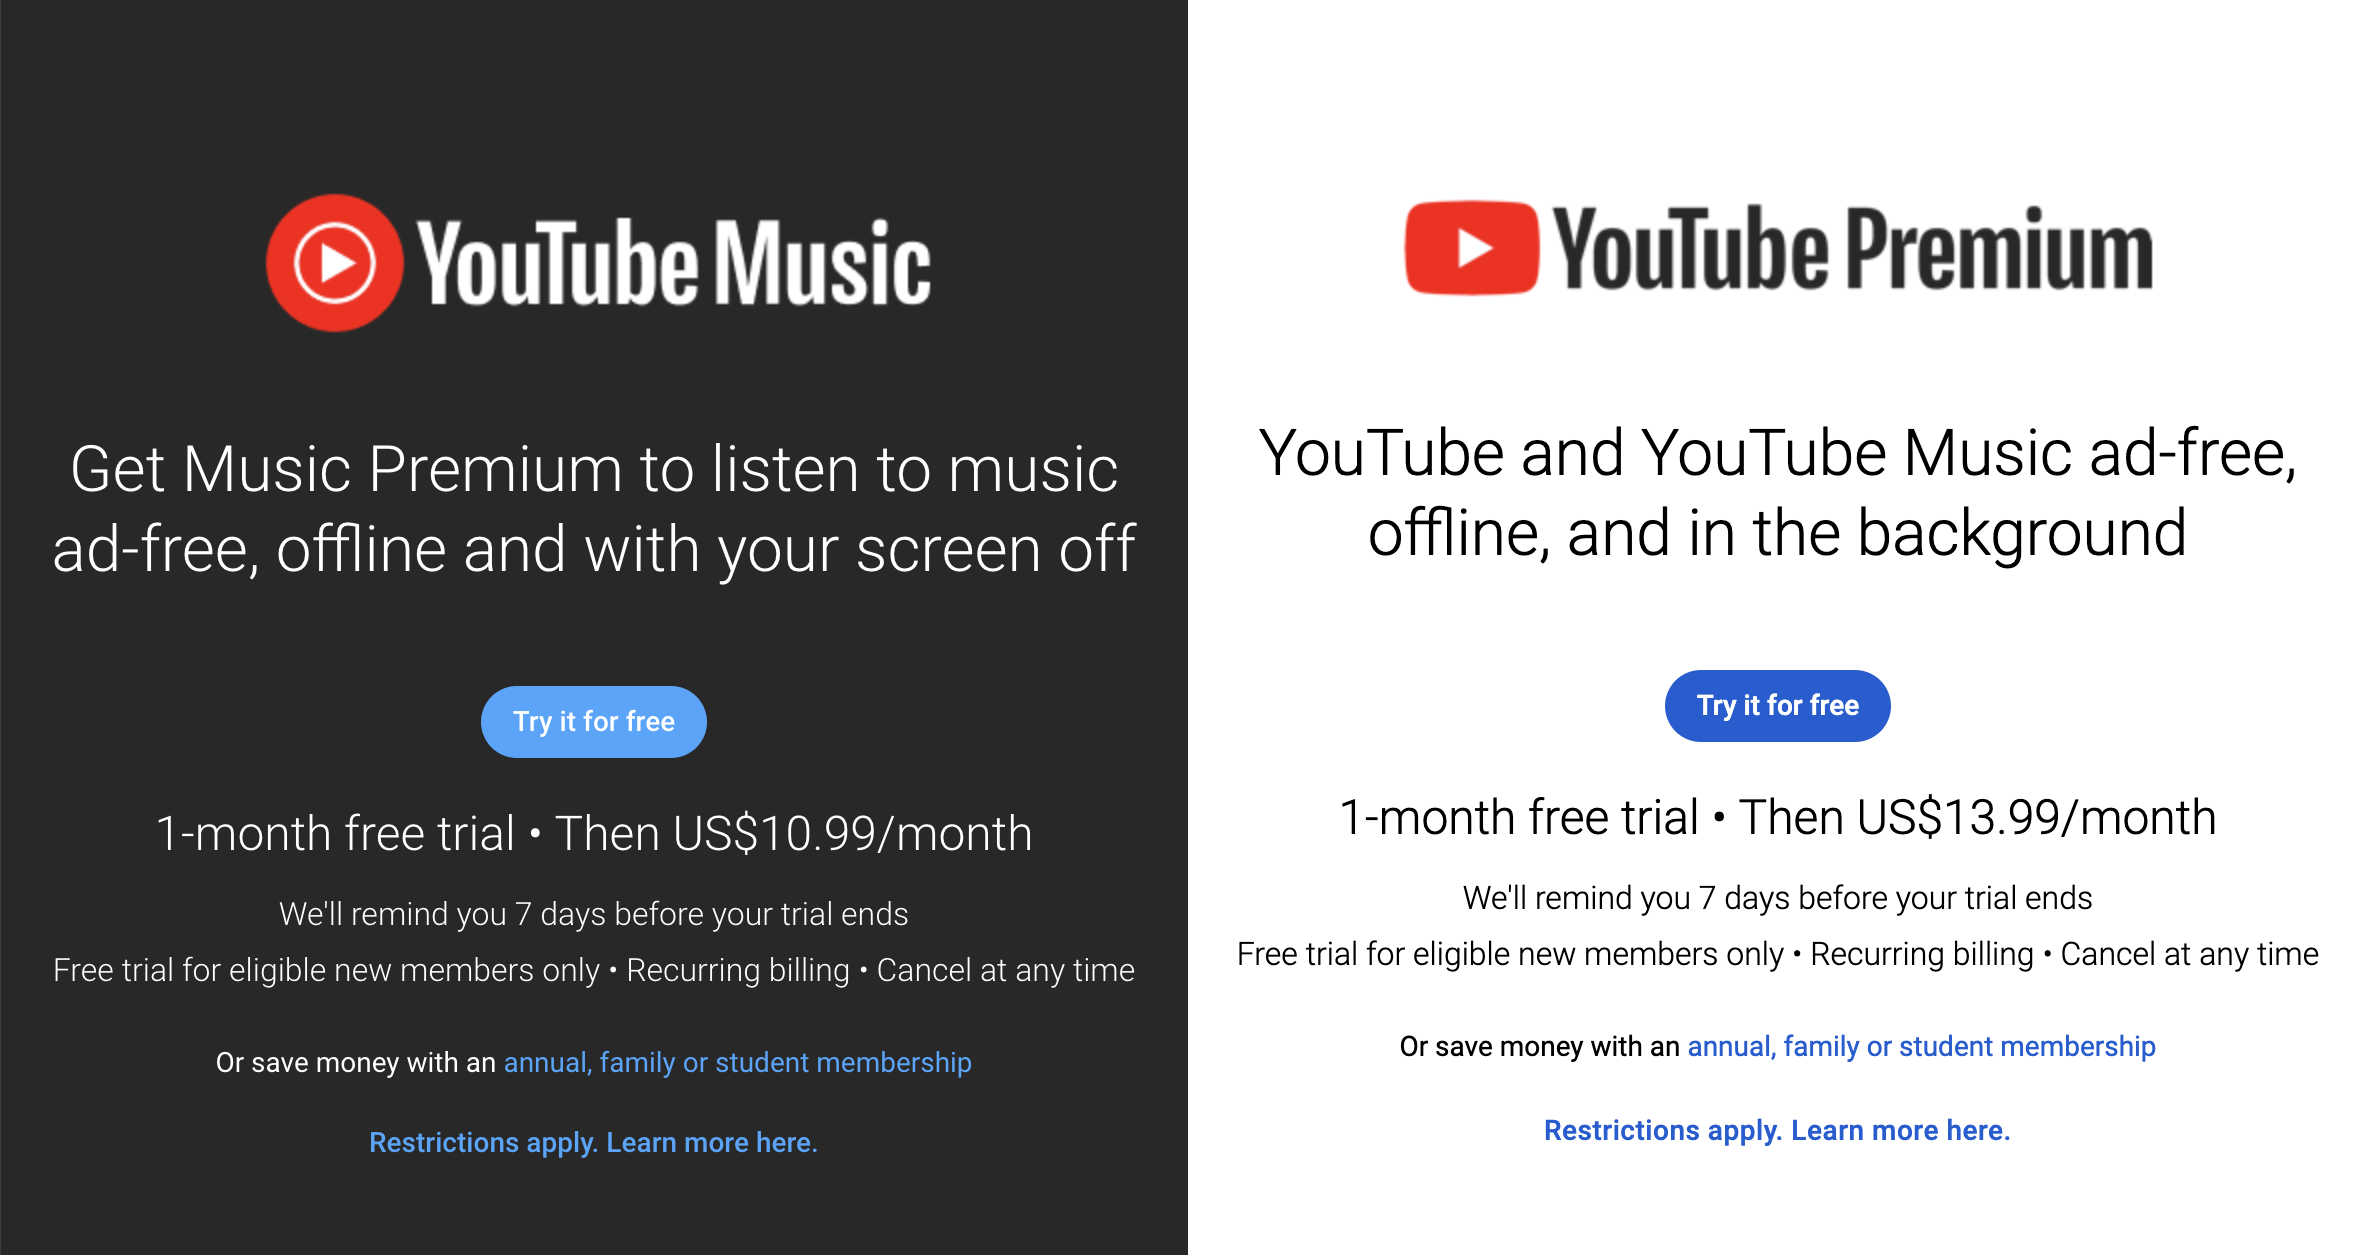 YouTube Premium and YouTube Music increase in price. Is Spotify next?